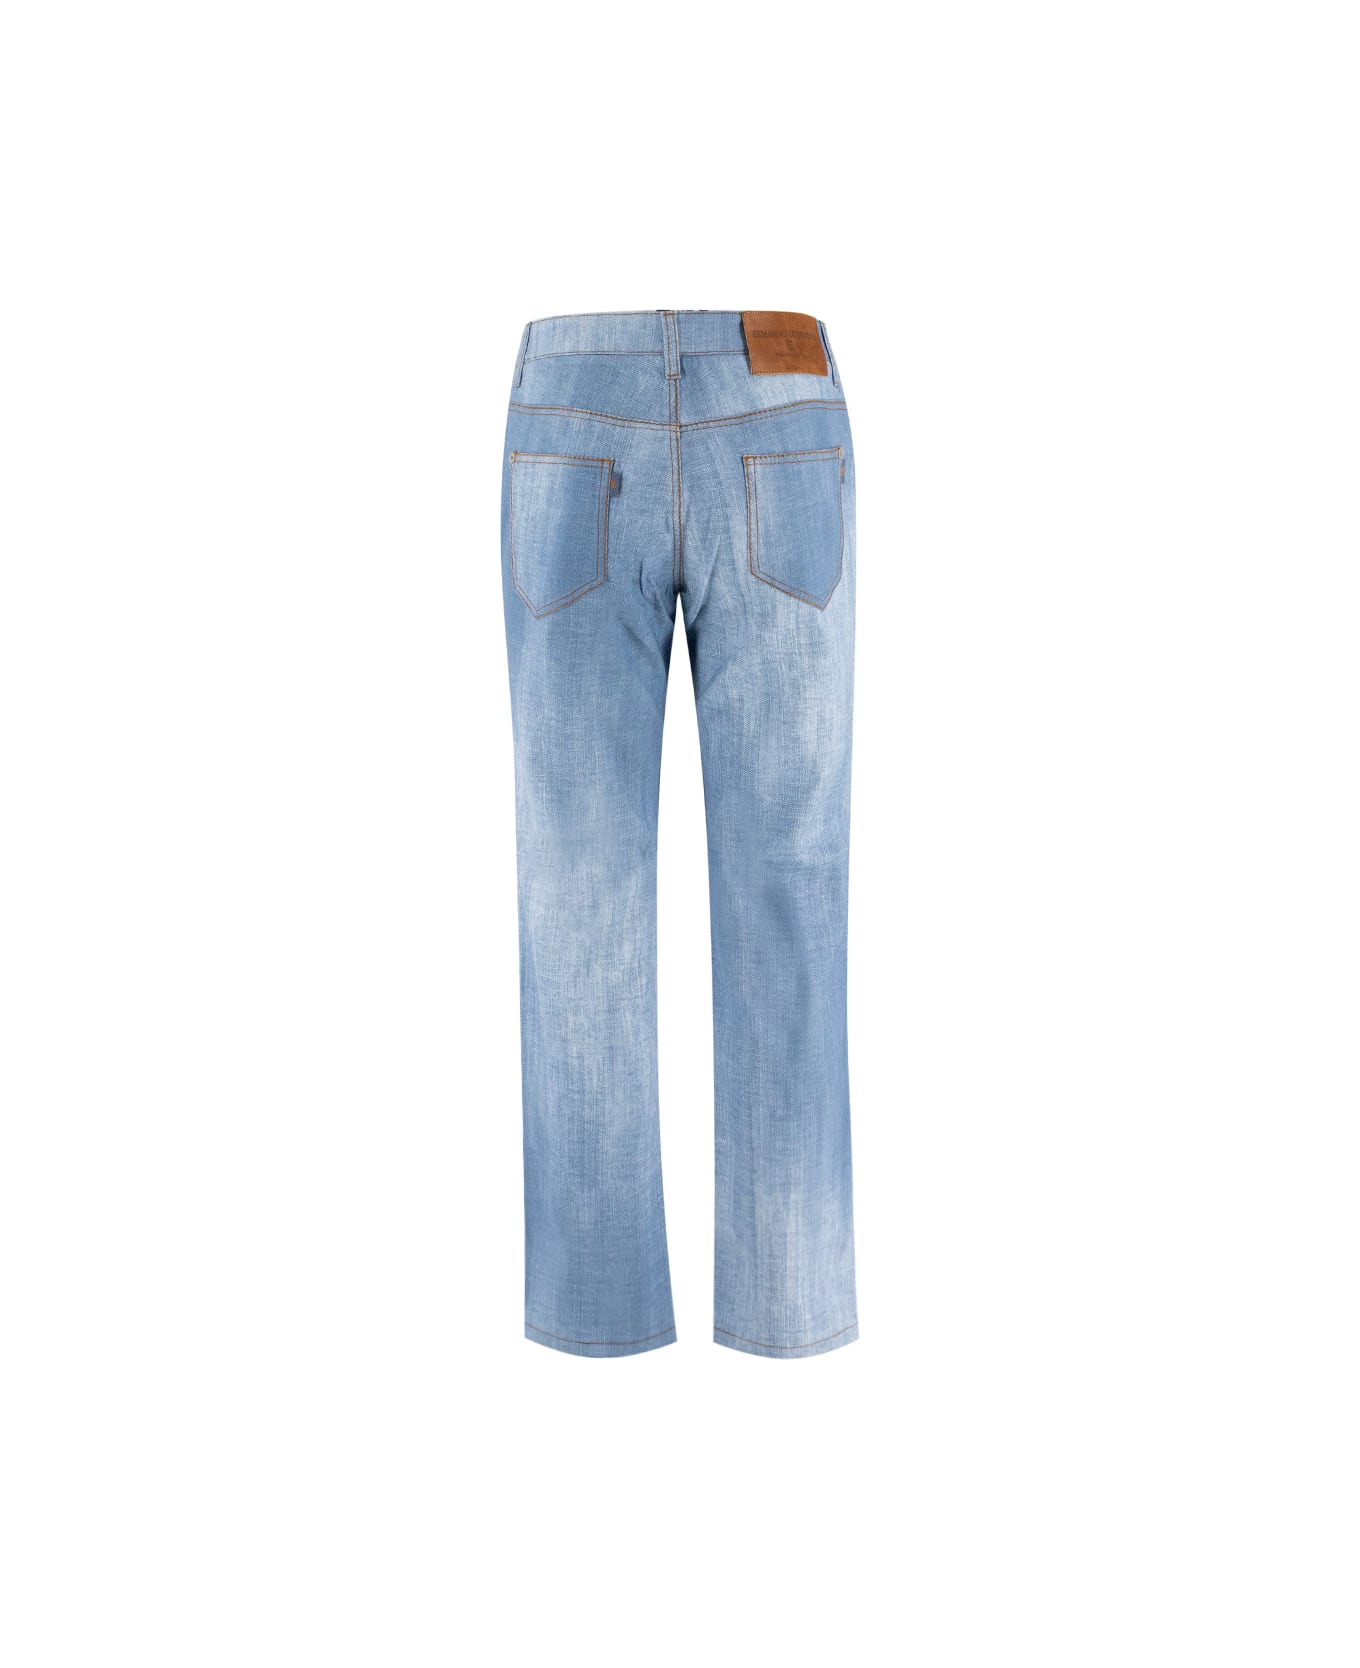 Ermanno Scervino Trousers - ST.JEANS